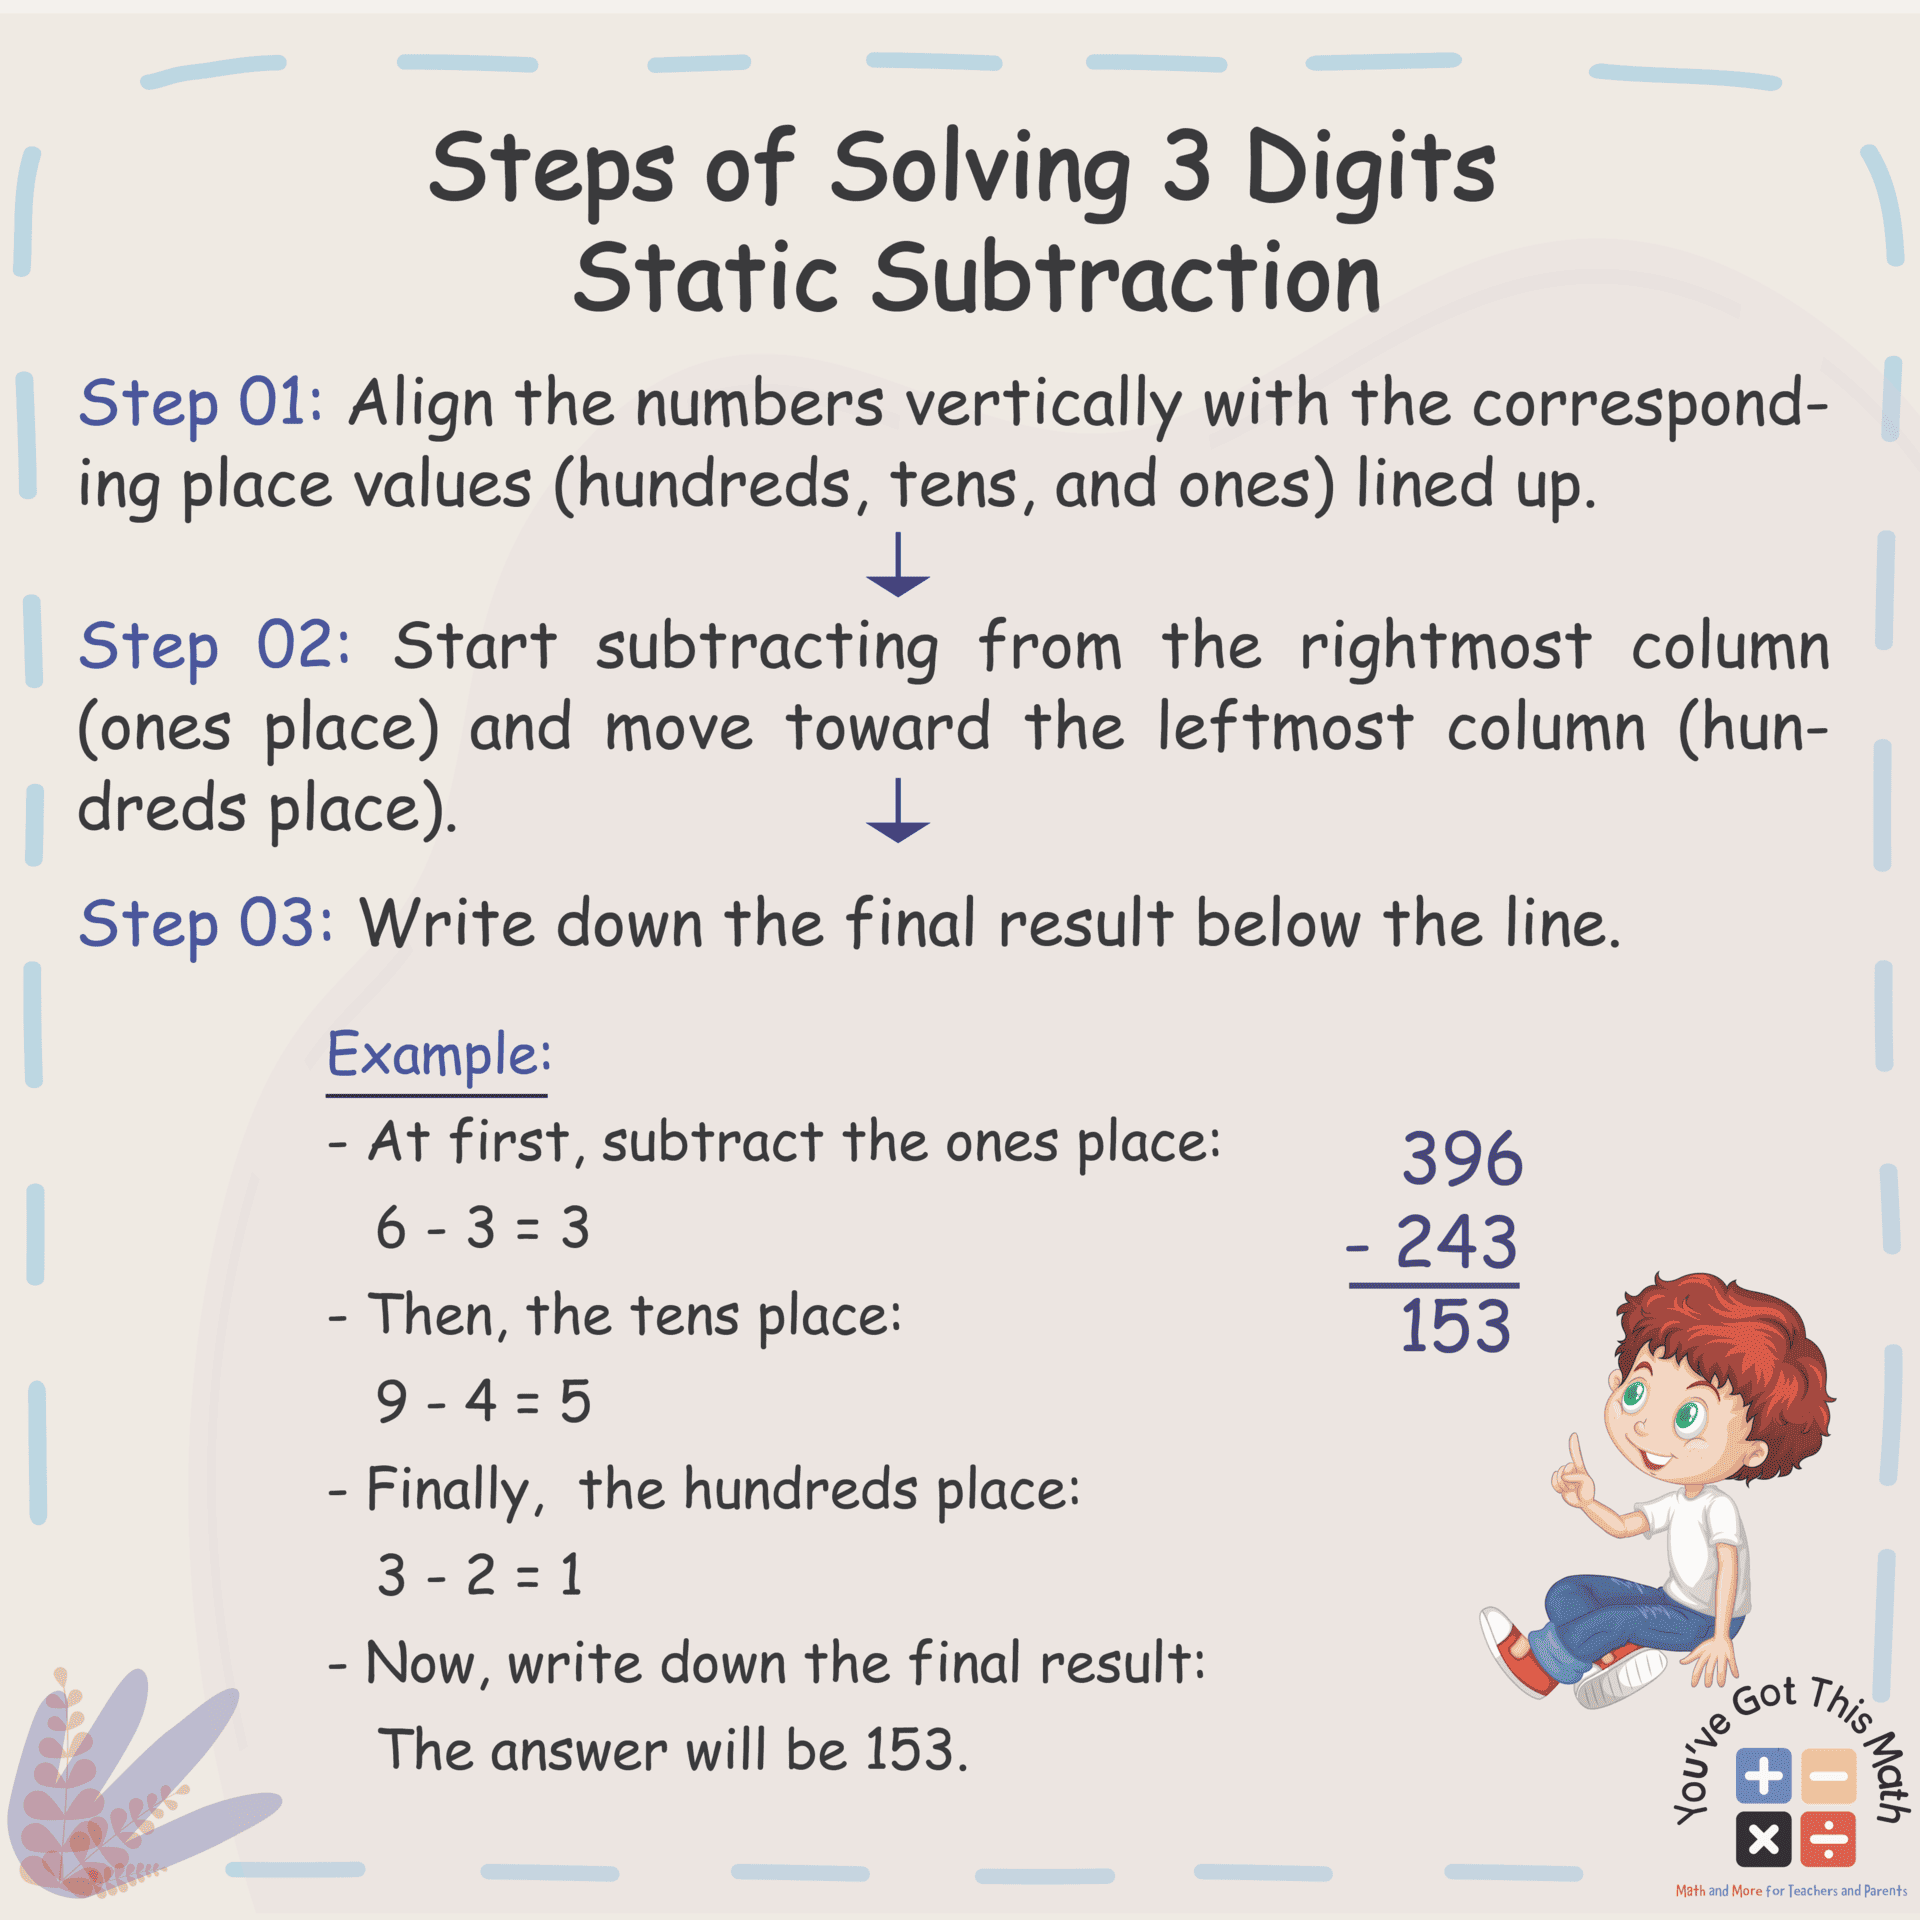 Steps of Solving 3 Digits Static Subtraction-01-01